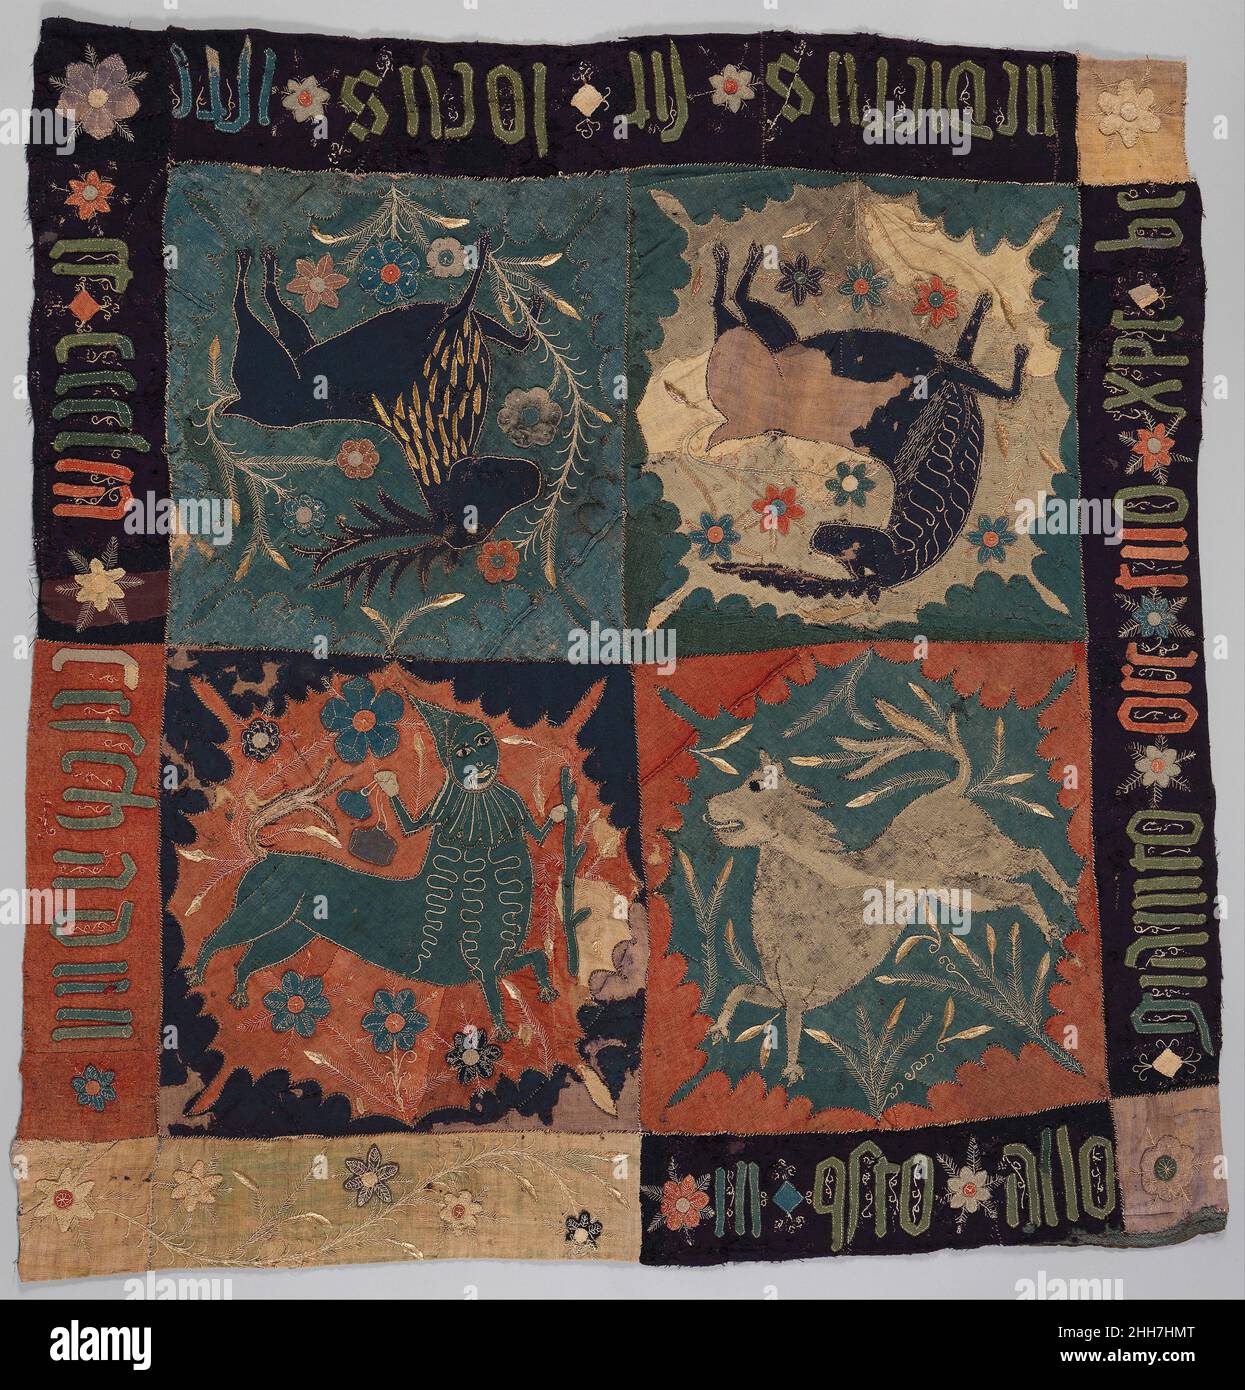 Textile Fragment with Unicorn, Deer, Centaur and Lion ca. 1500 Scandinavian Like the cloth from Perugia seen here, this textile features a combination of real and imaginary creatures. The inscription, only partially legible and apparently mixing Latin and Italian, invokes the name of Christ and the Church, indicating the cloth’s original use in a religious context.. Textile Fragment with Unicorn, Deer, Centaur and Lion  479598 Stock Photo